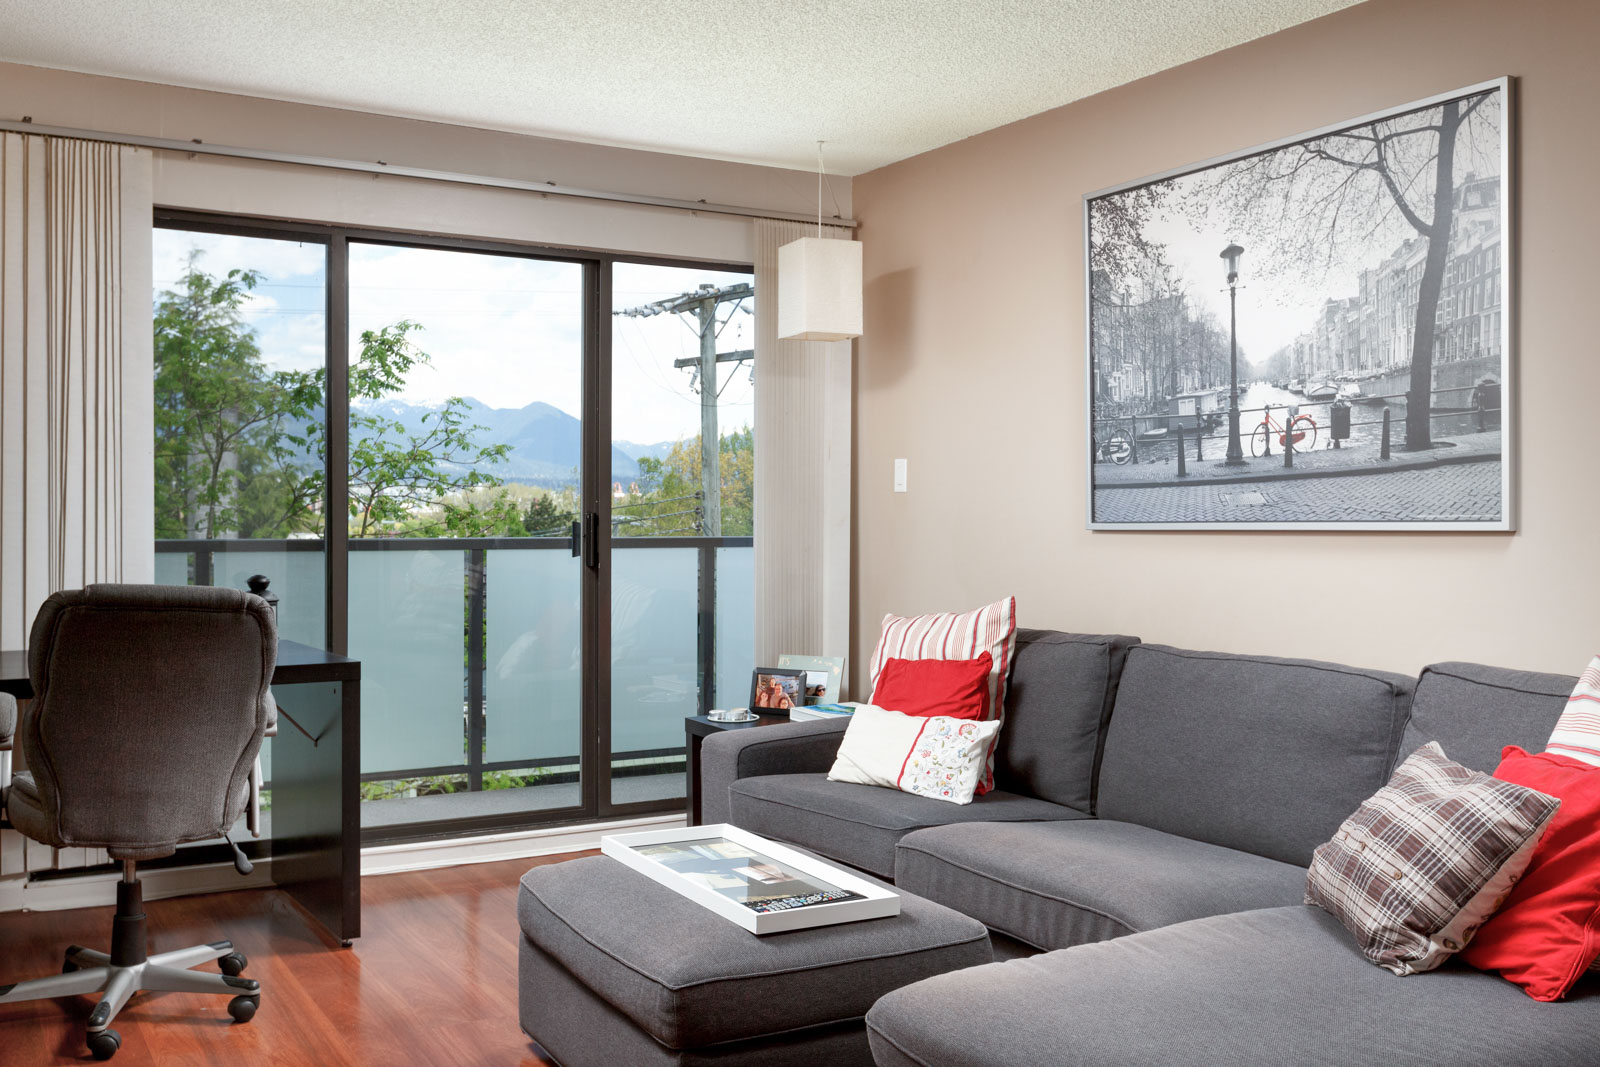 Living room with access to private balcony overlooking Vancouver.